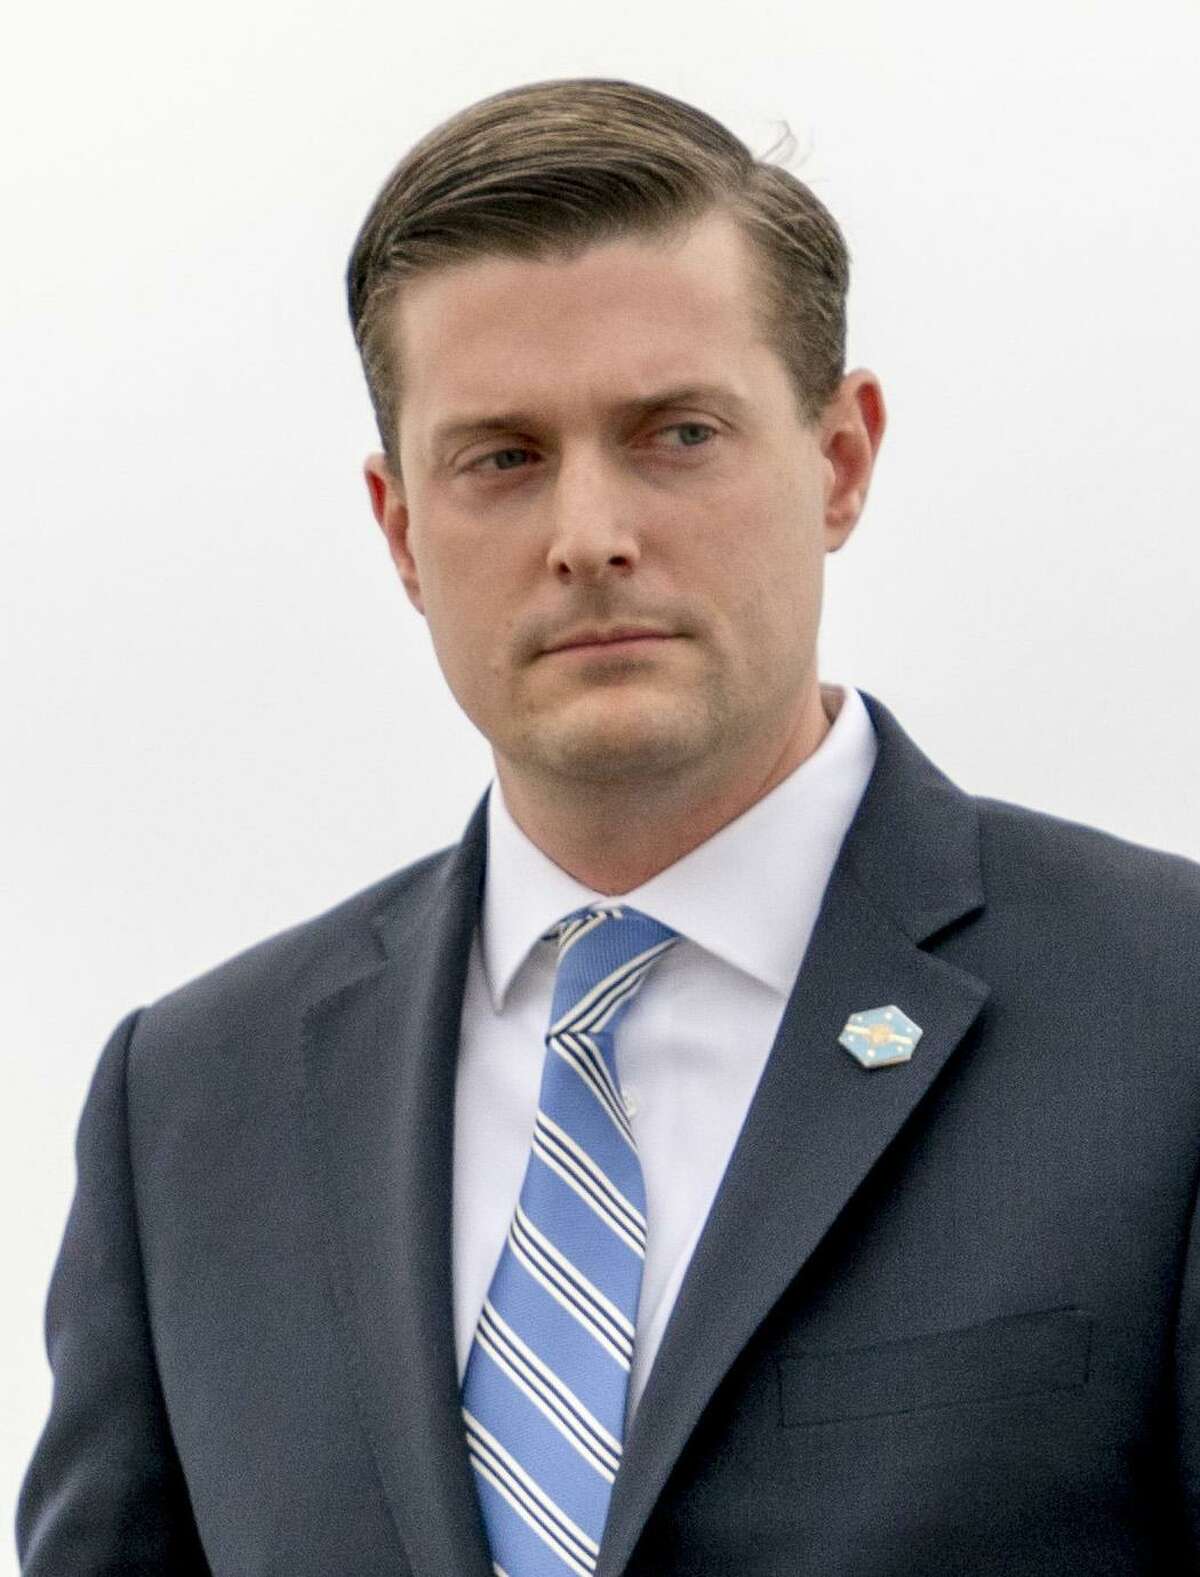 White House Staff Secretary Rob Porter. Porter resign his position after a news account that quoted his two ex-wives accusing him of physical abuse during the course of their marriages.